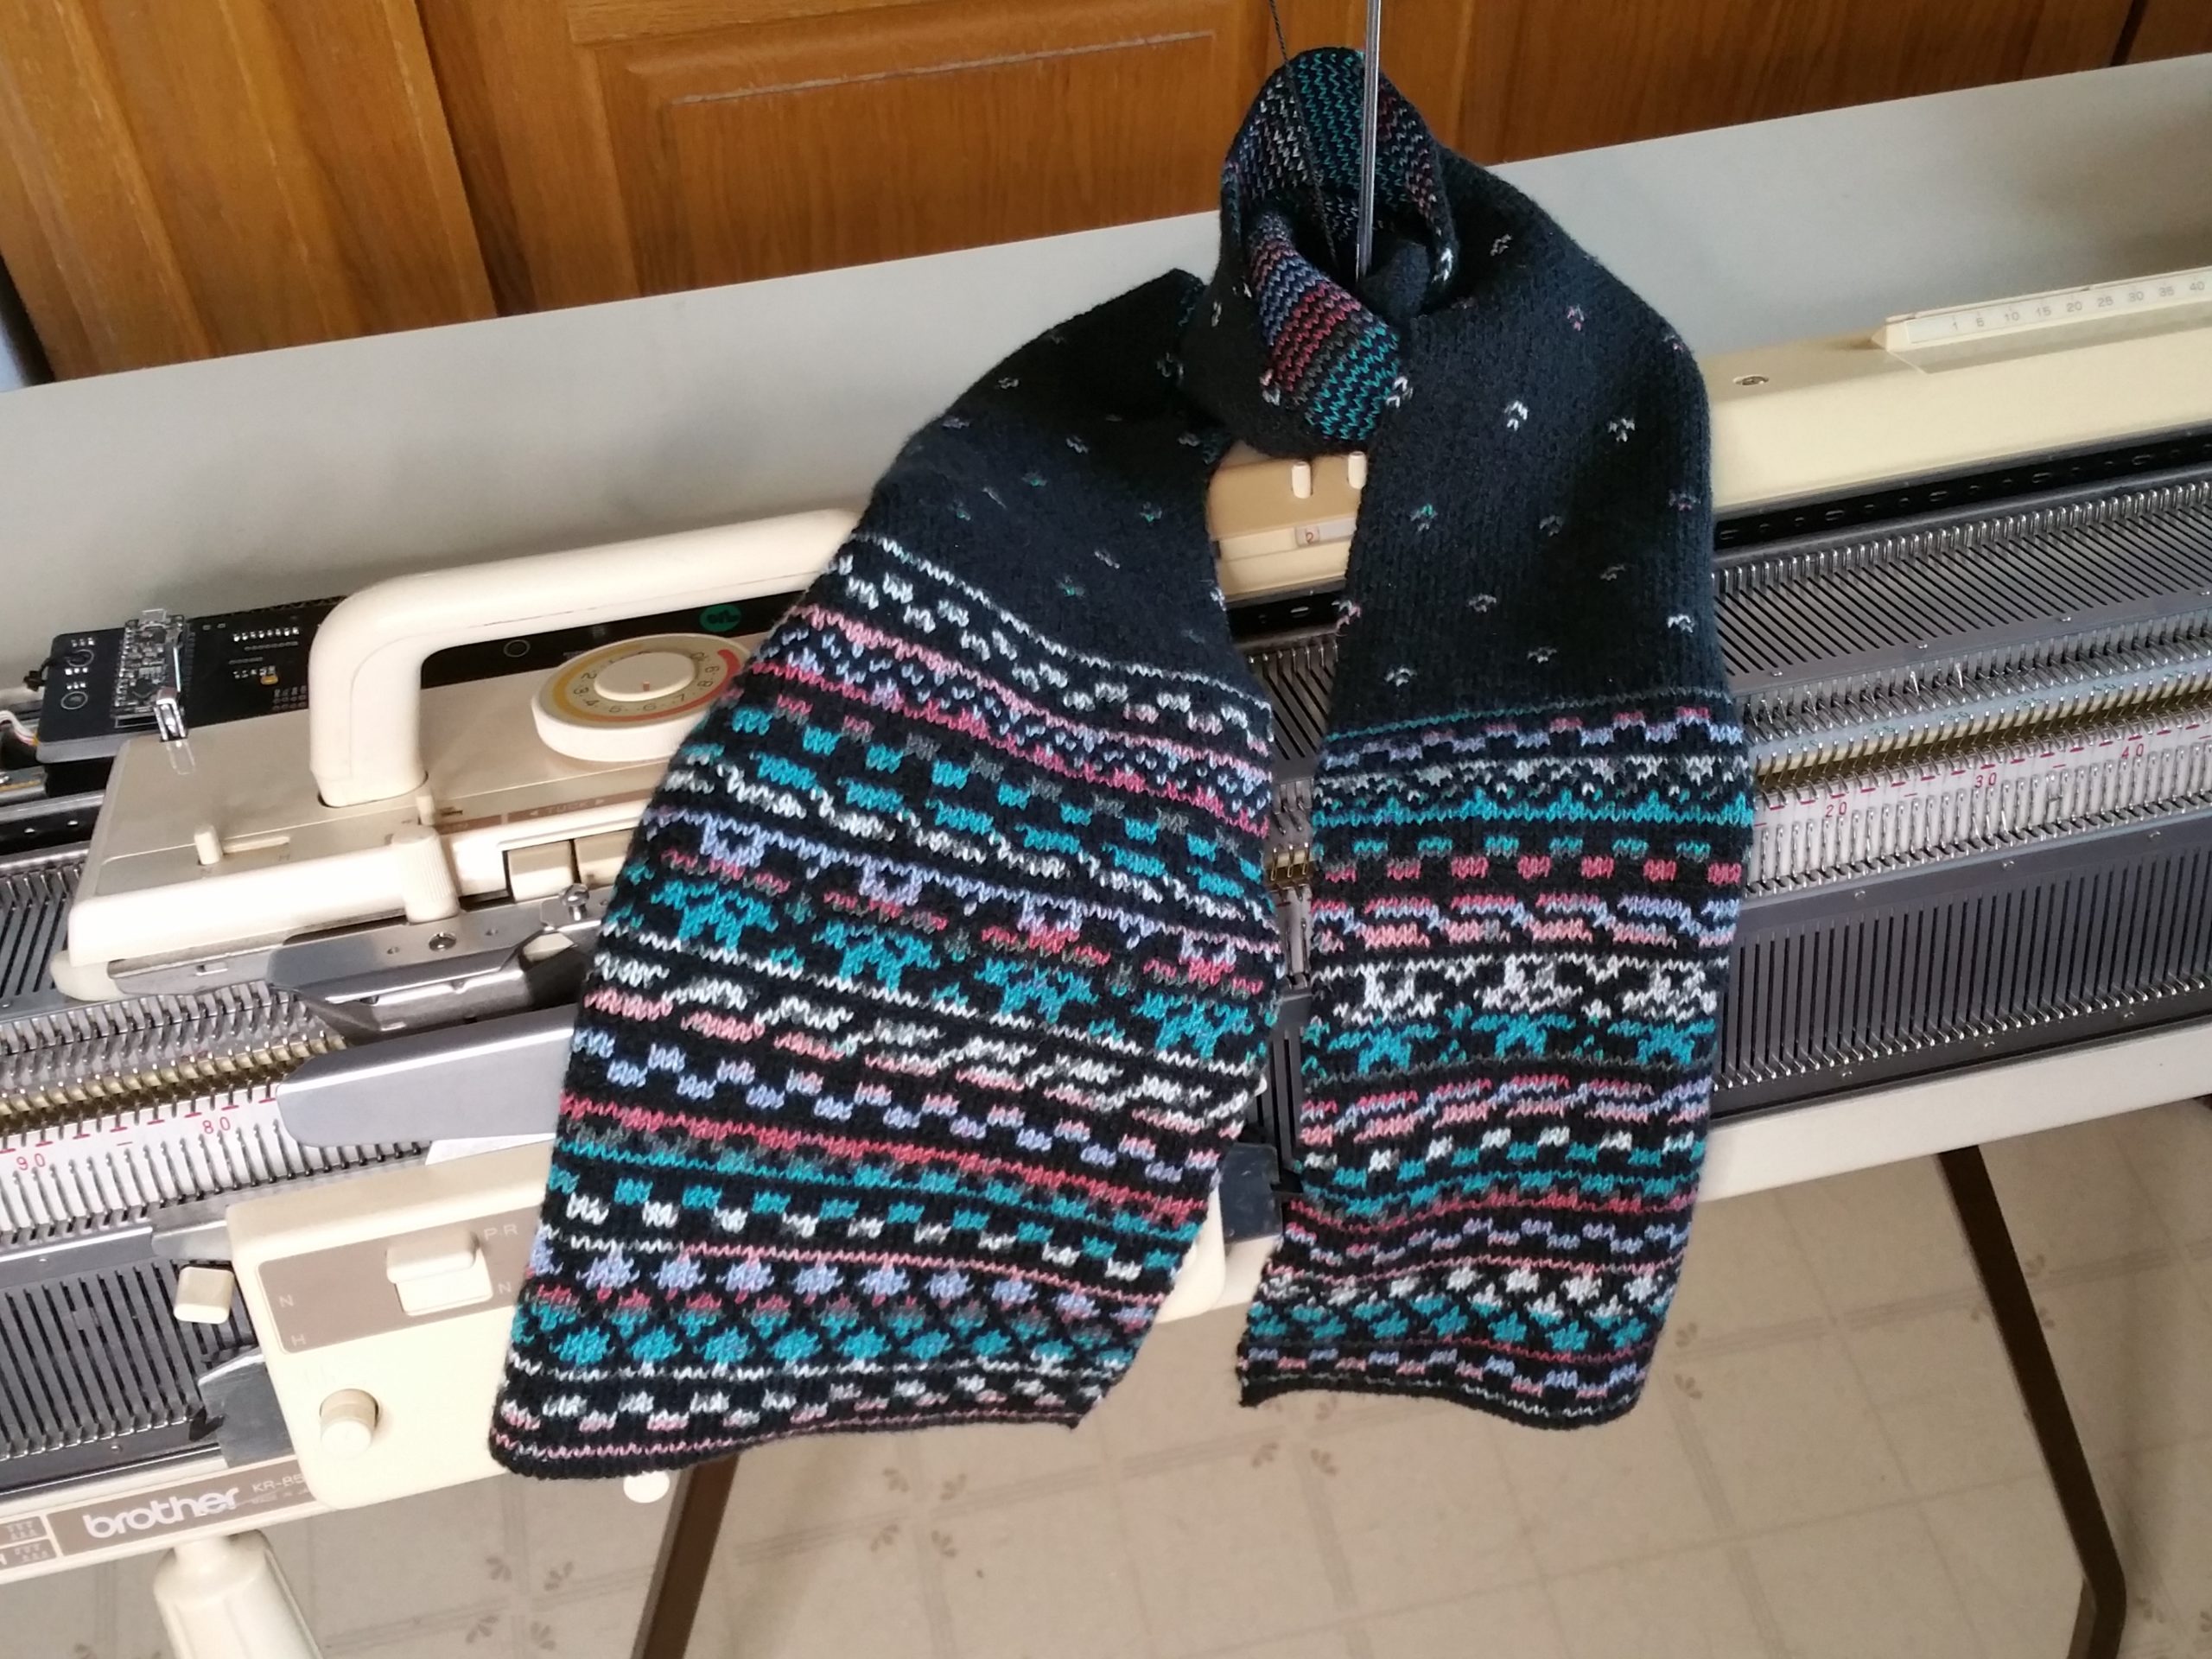 Color-Patterned Scarf Using a Hacked Knitting Machine